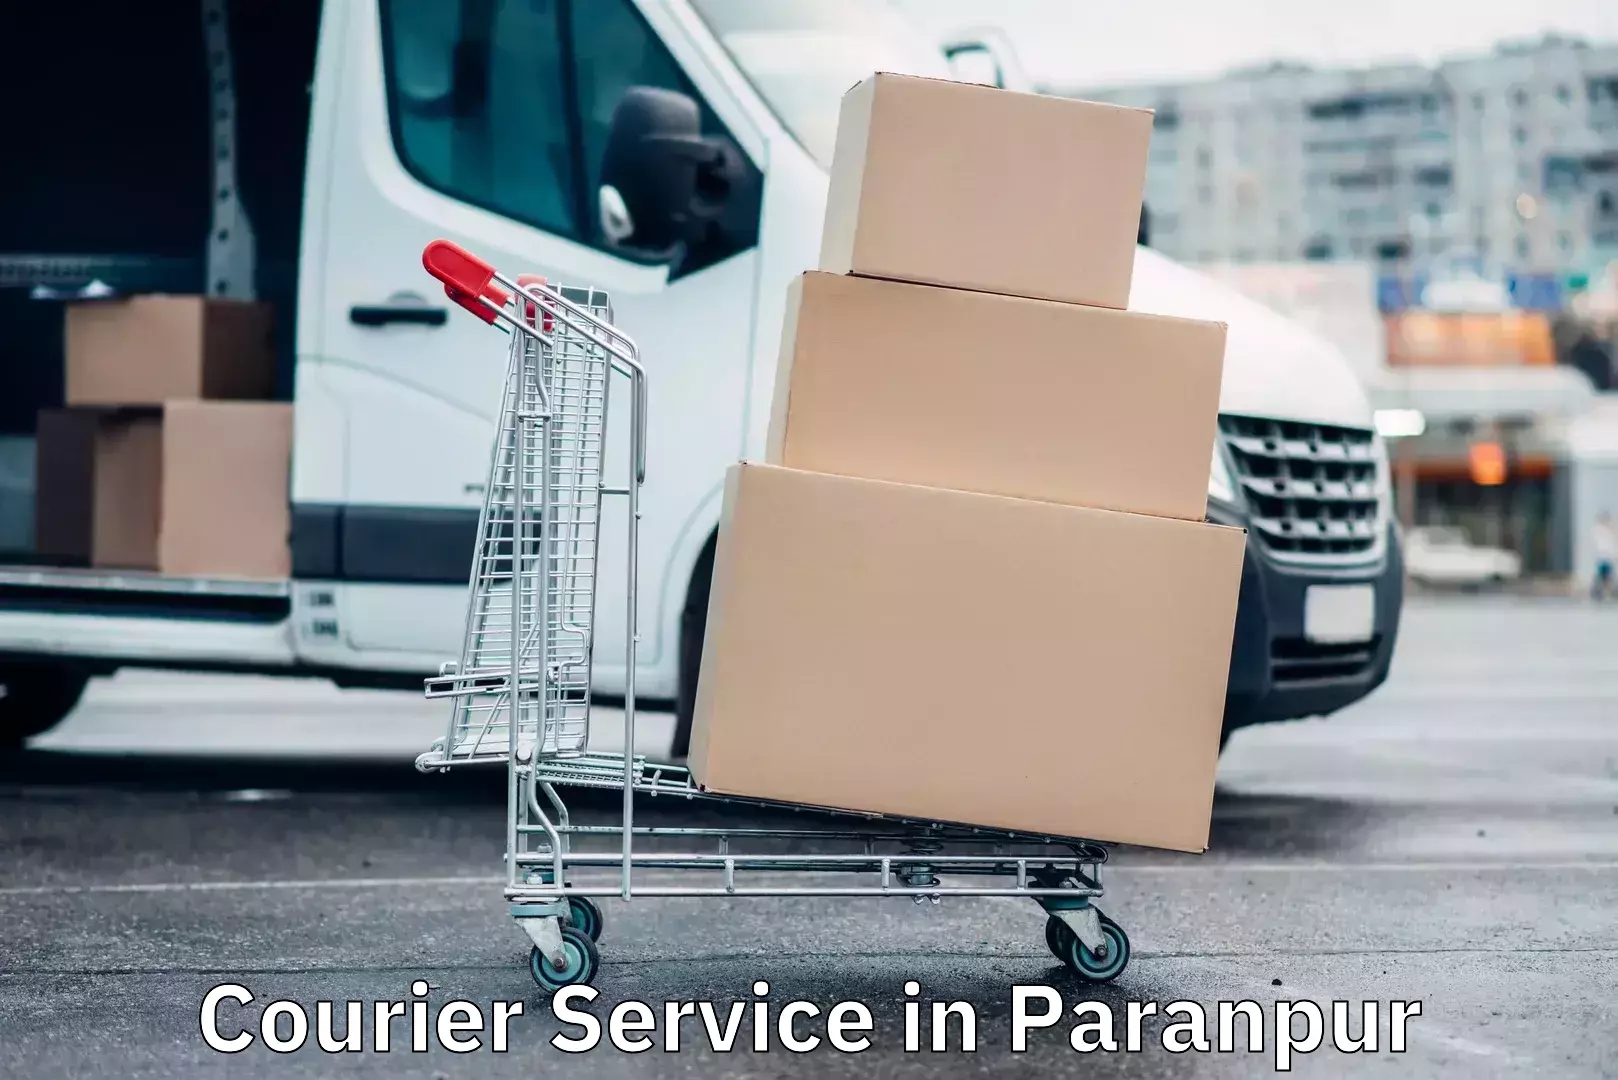 Bulk courier orders in Paranpur